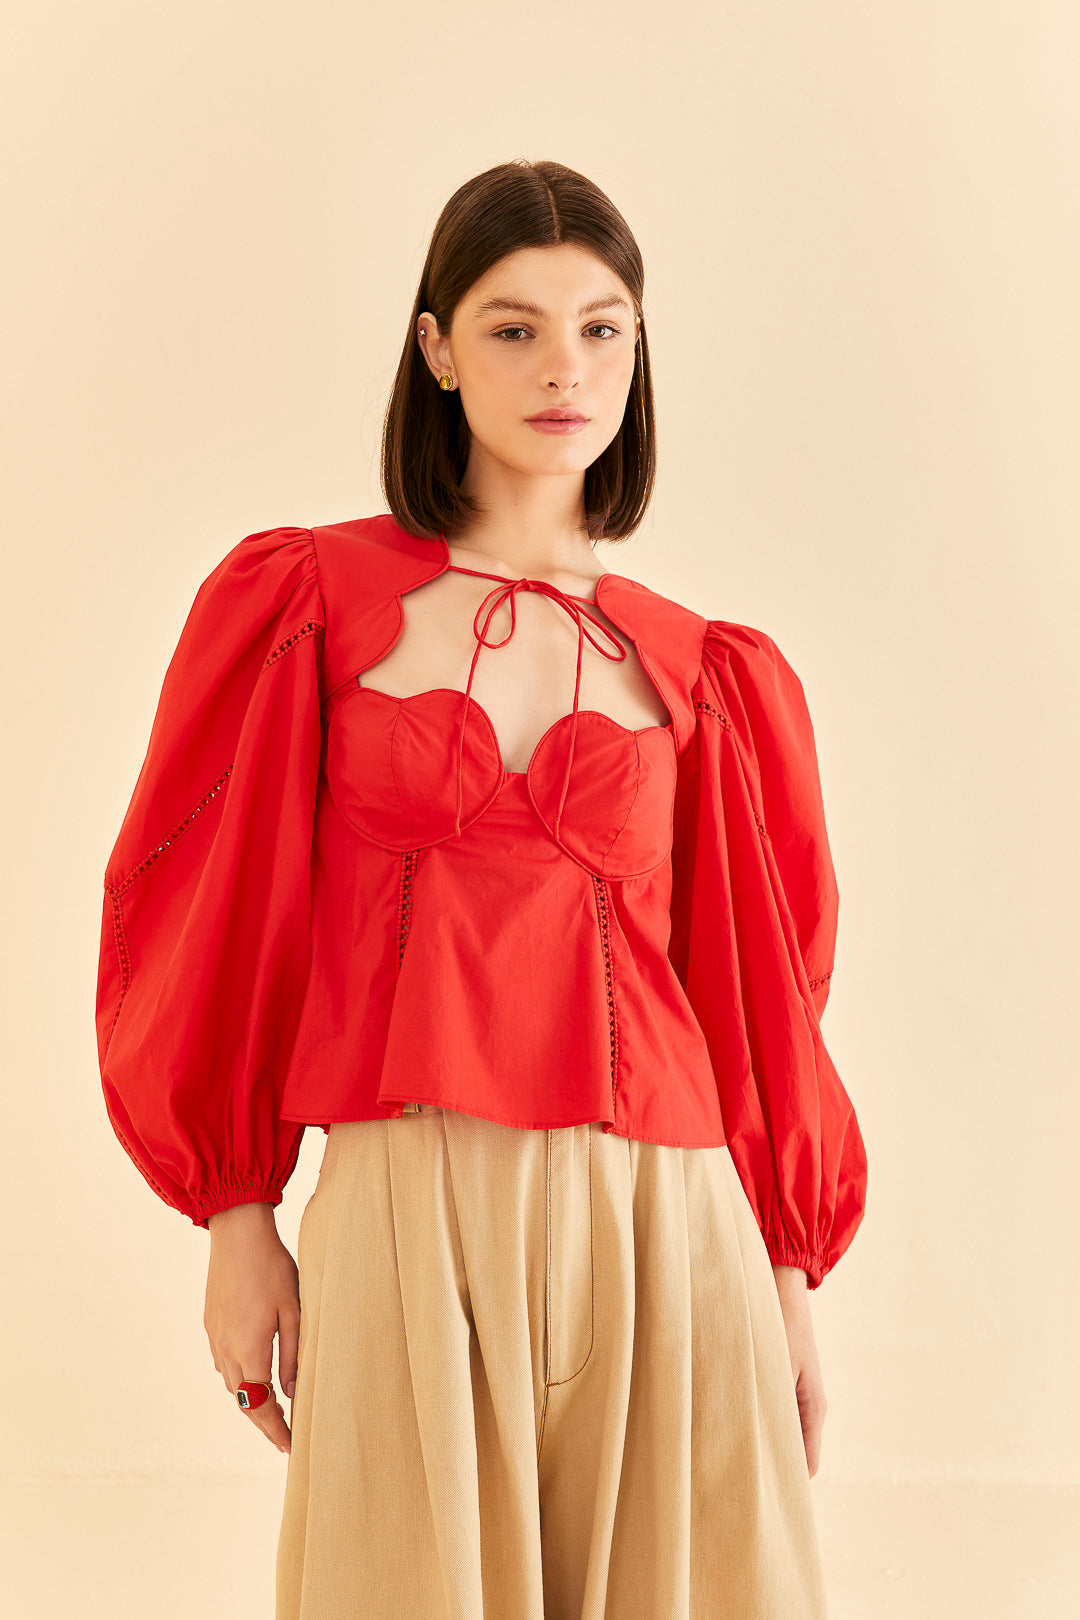 Red Heart Shaped Neckline Blouse